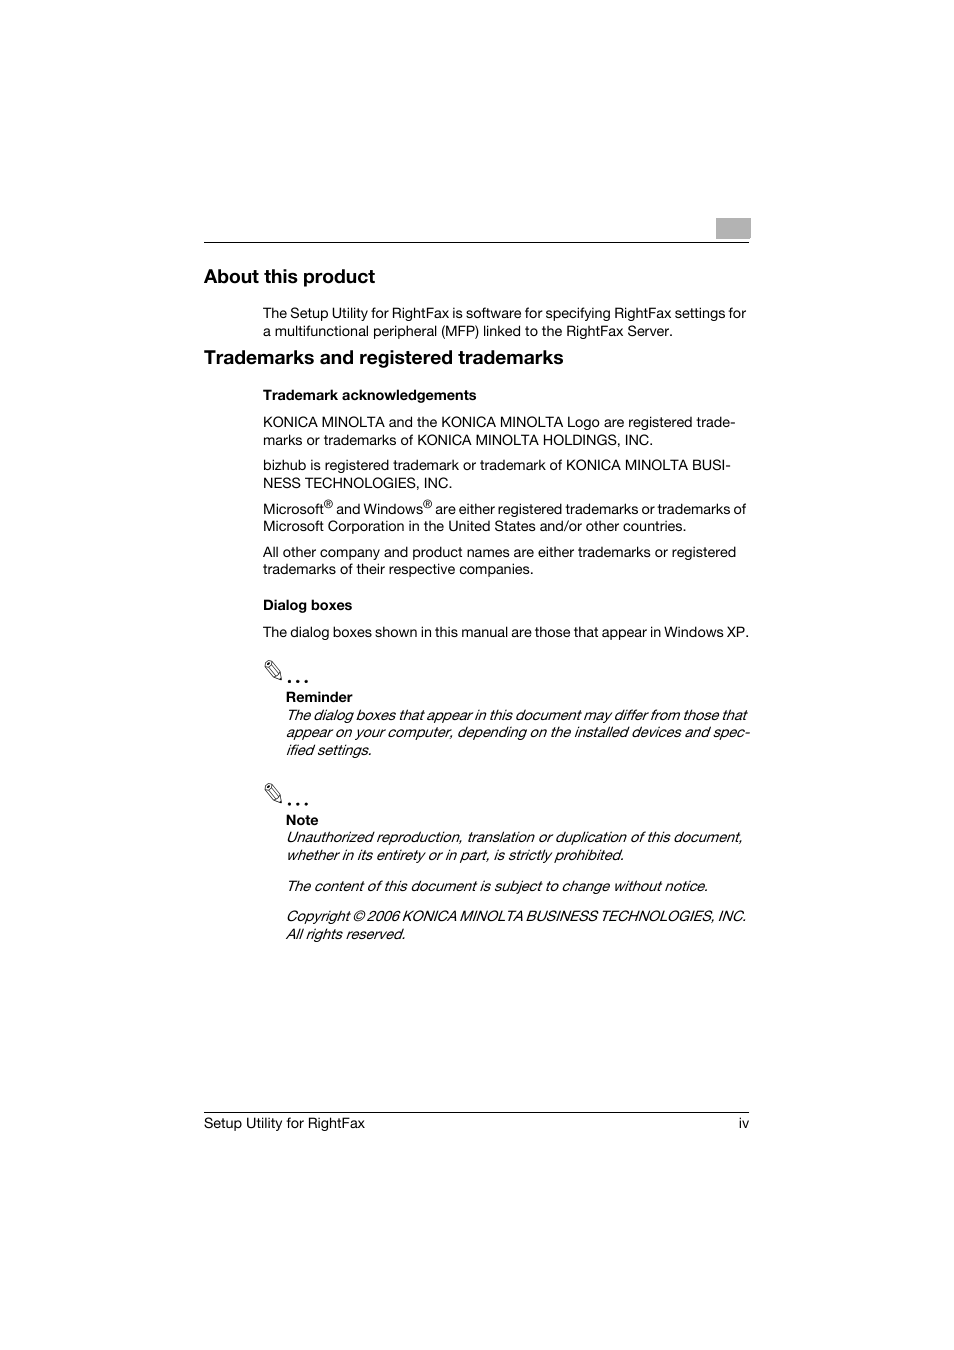 About this product, Trademarks and registered trademarks, Trademark acknowledgements | Dialog boxes | Konica Minolta bizhub 751 User Manual | Page 5 / 65